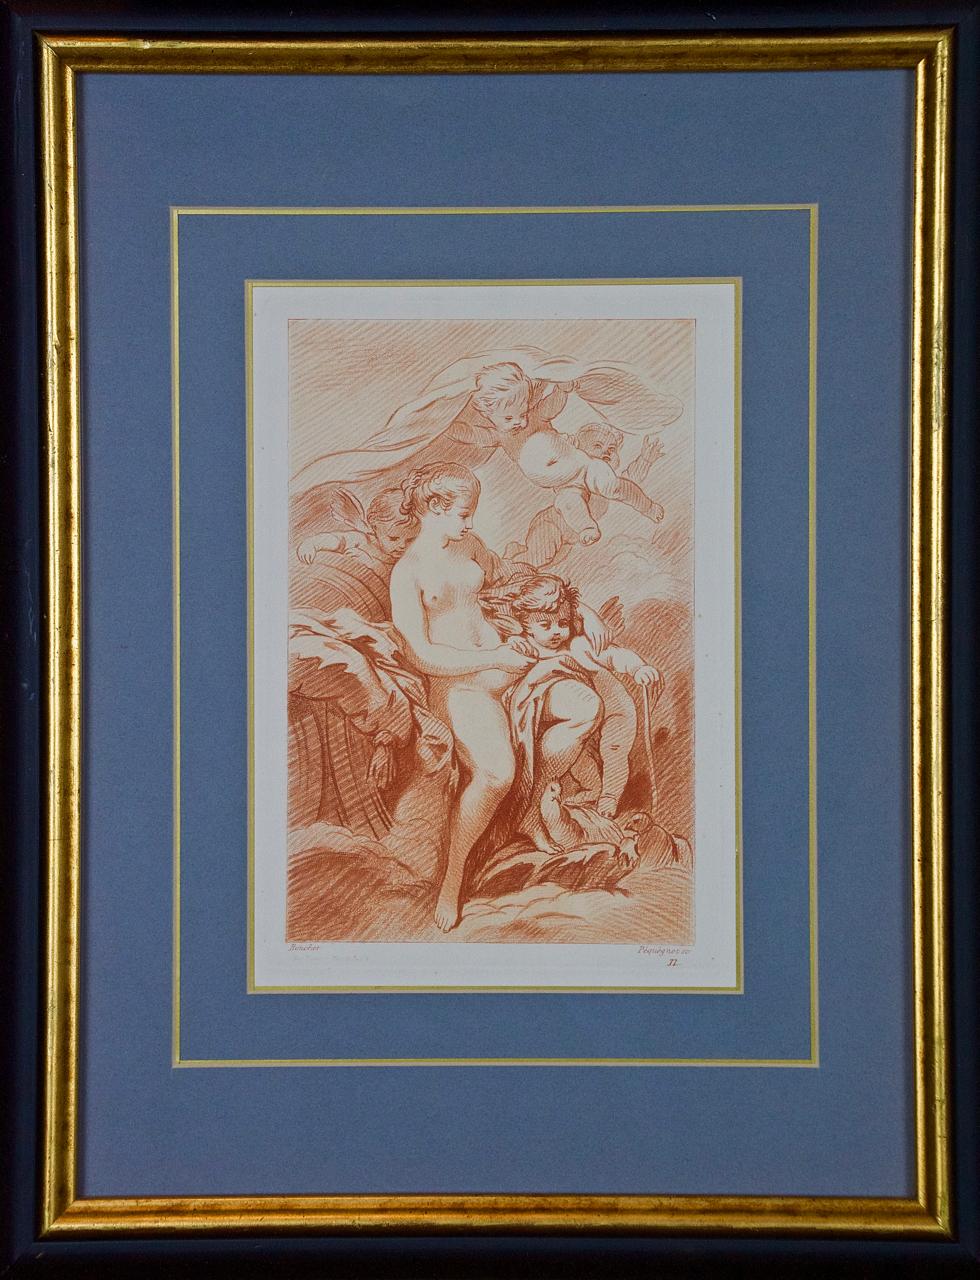 Each of these tinted etchings depicts a young woman with cherubs (putti), one of which holds an arrow, possibly representing Cupid. These etchings were created by Auguste Pequegnot after paintings by François Boucher. They were plates 11 and 12 in